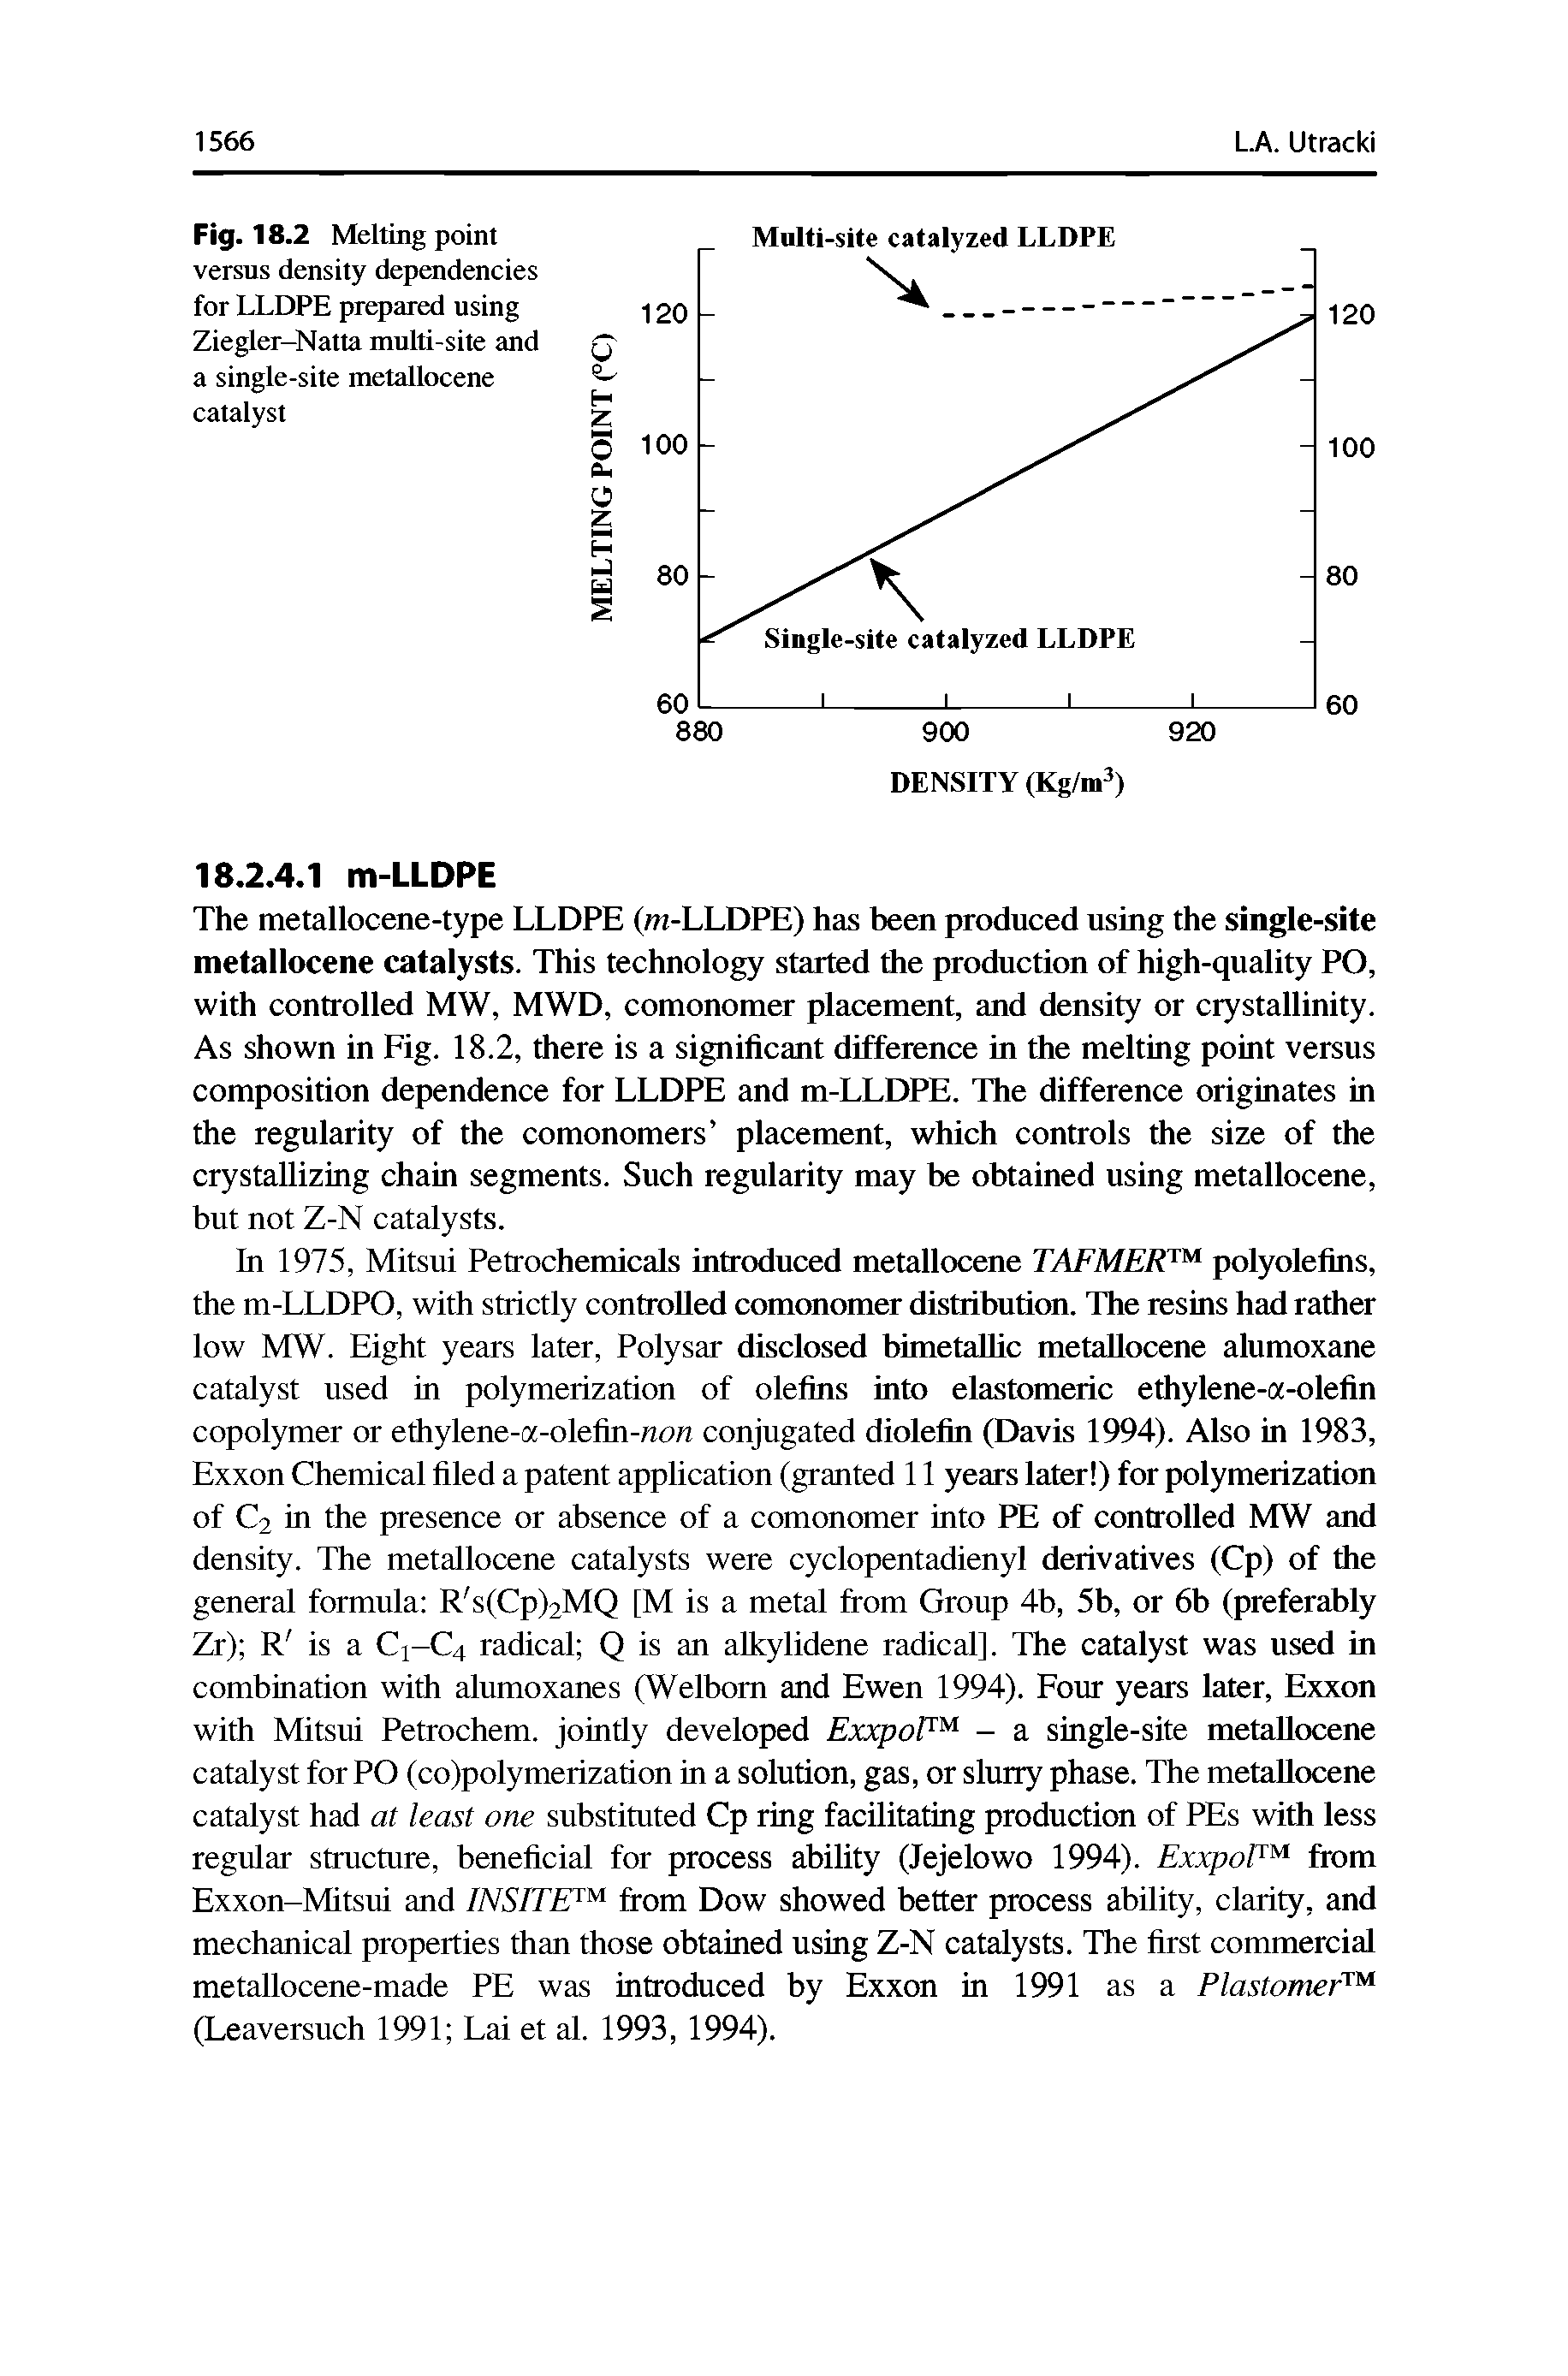 Fig. 18.2 Melting point versus density dependencies for LLDPE prepared using Ziegler-Natta multi-site and a single-site metallocene catalyst...